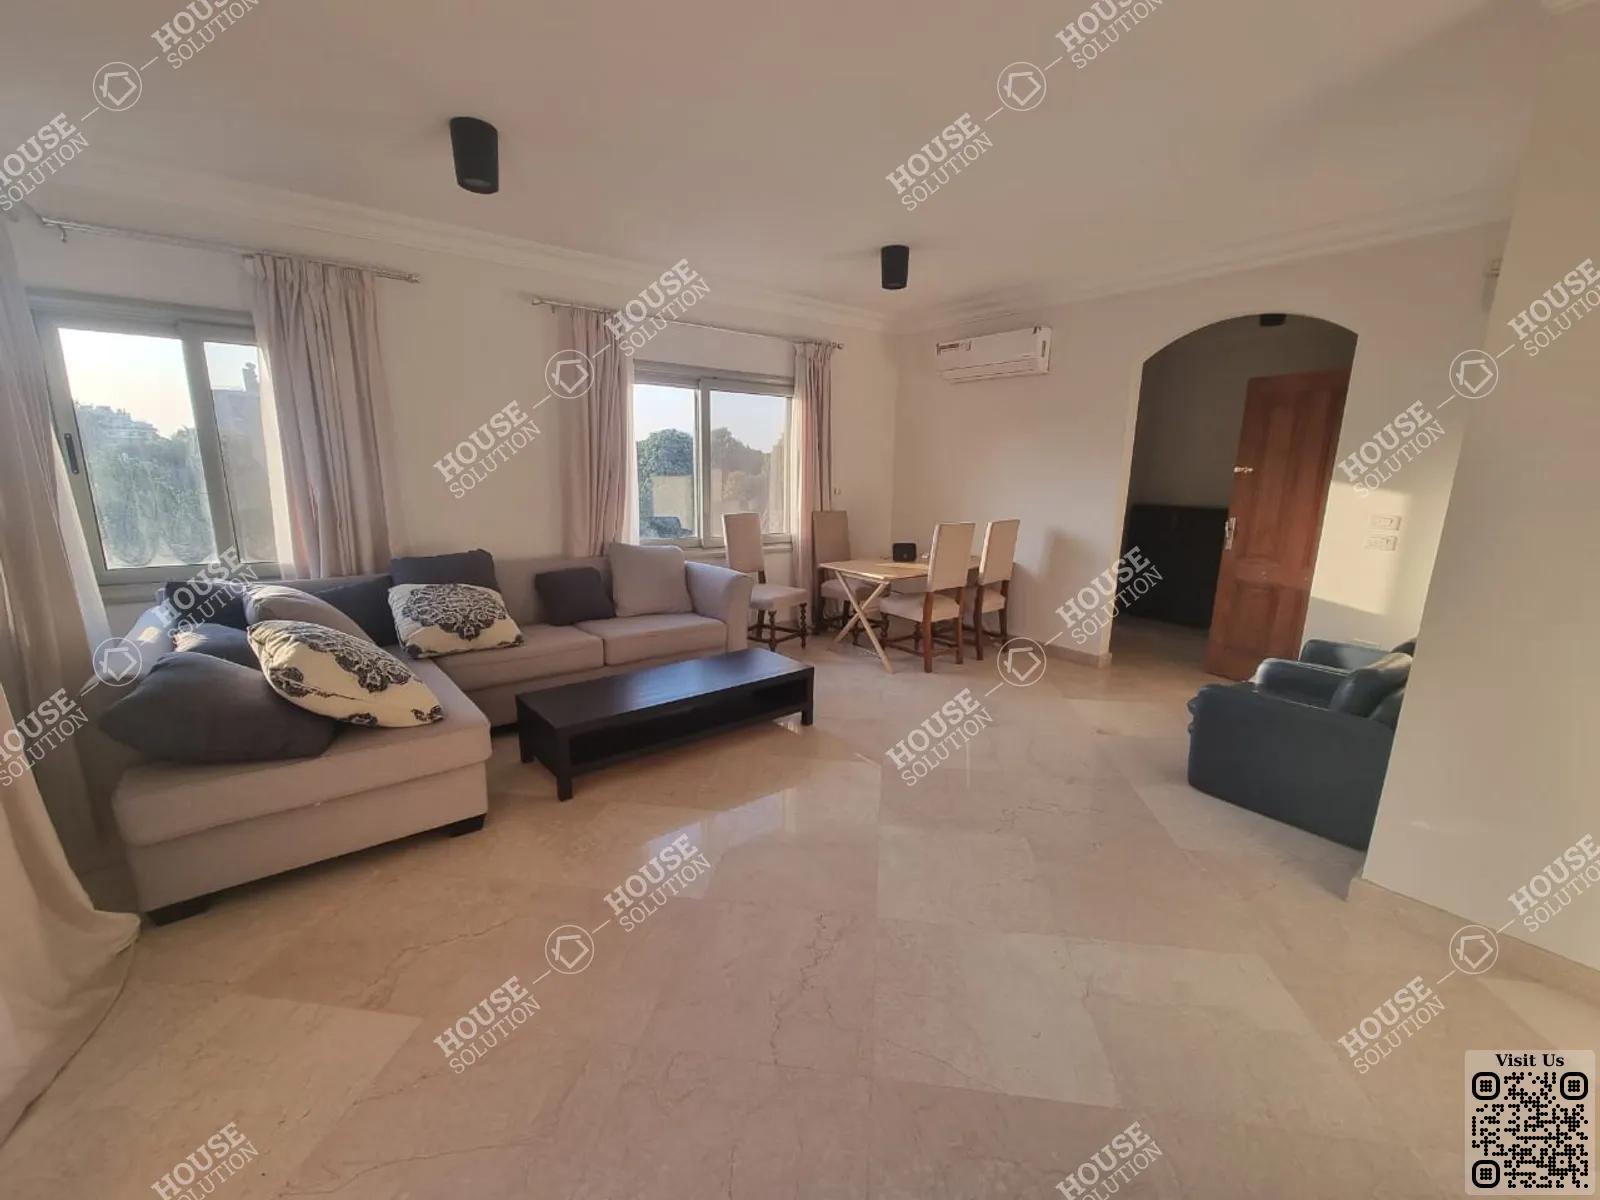 RECEPTION  @ Apartments For Rent In Maadi Maadi Degla Area: 185 m² consists of 2 Bedrooms 3 Bathrooms Modern furnished 5 stars #5627-2